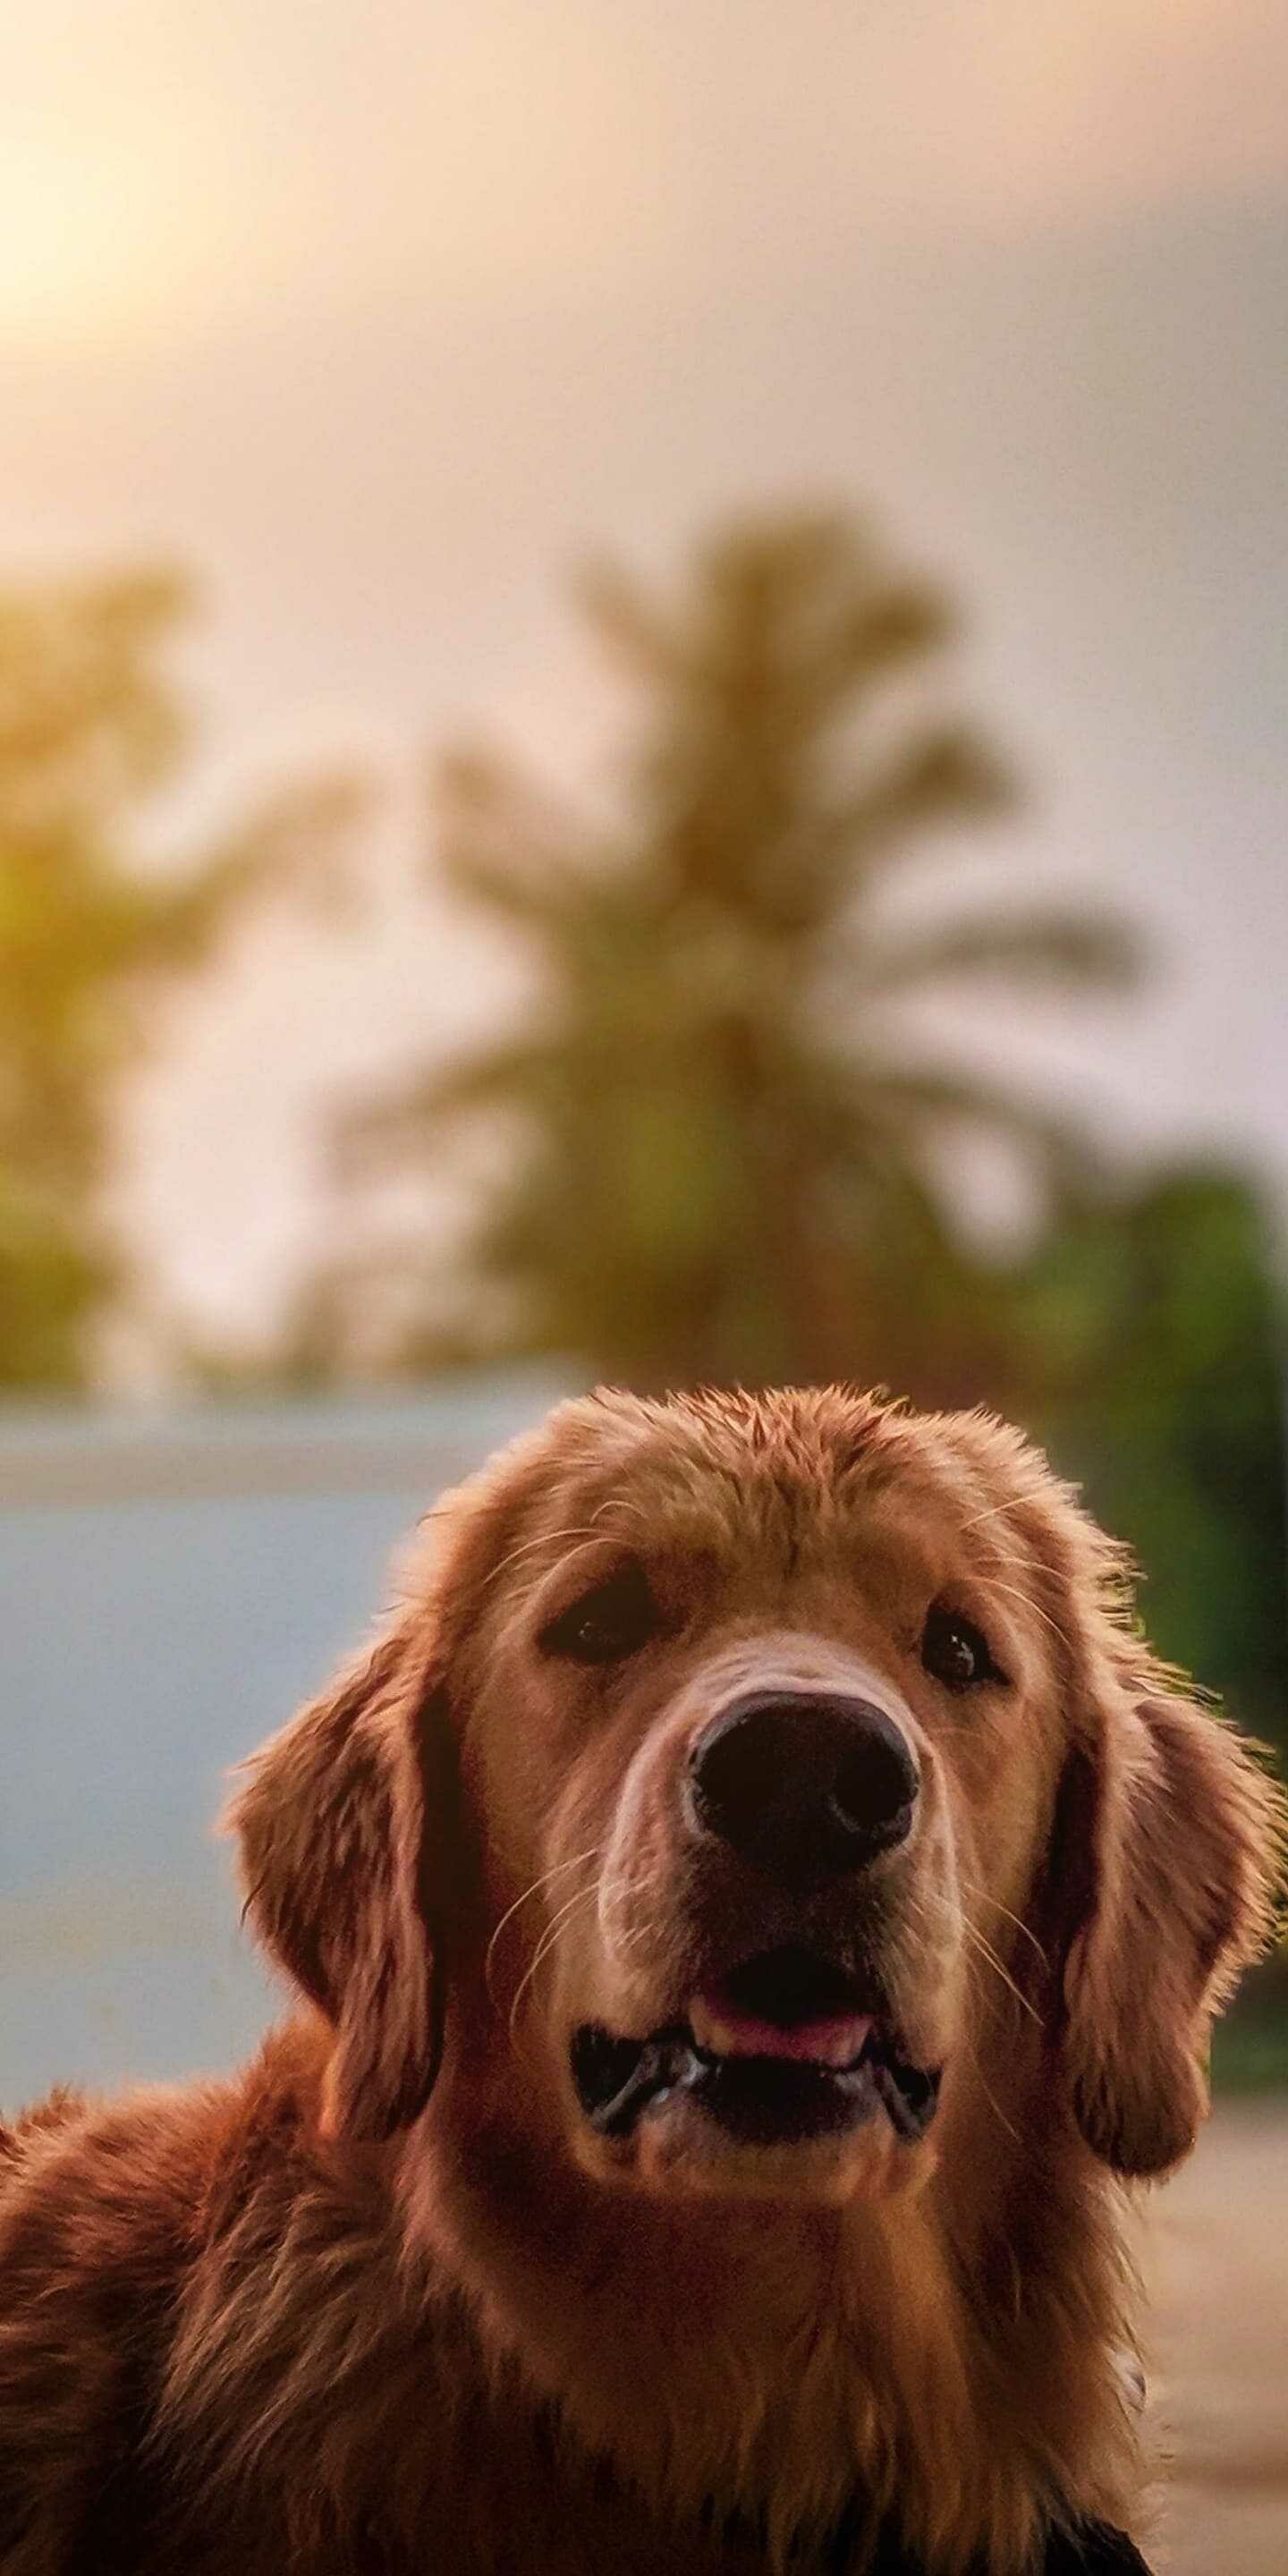 Dog: Golden Retriever, A Scottish breed, Characterized by a gentle and affectionate nature. 1440x2880 HD Wallpaper.